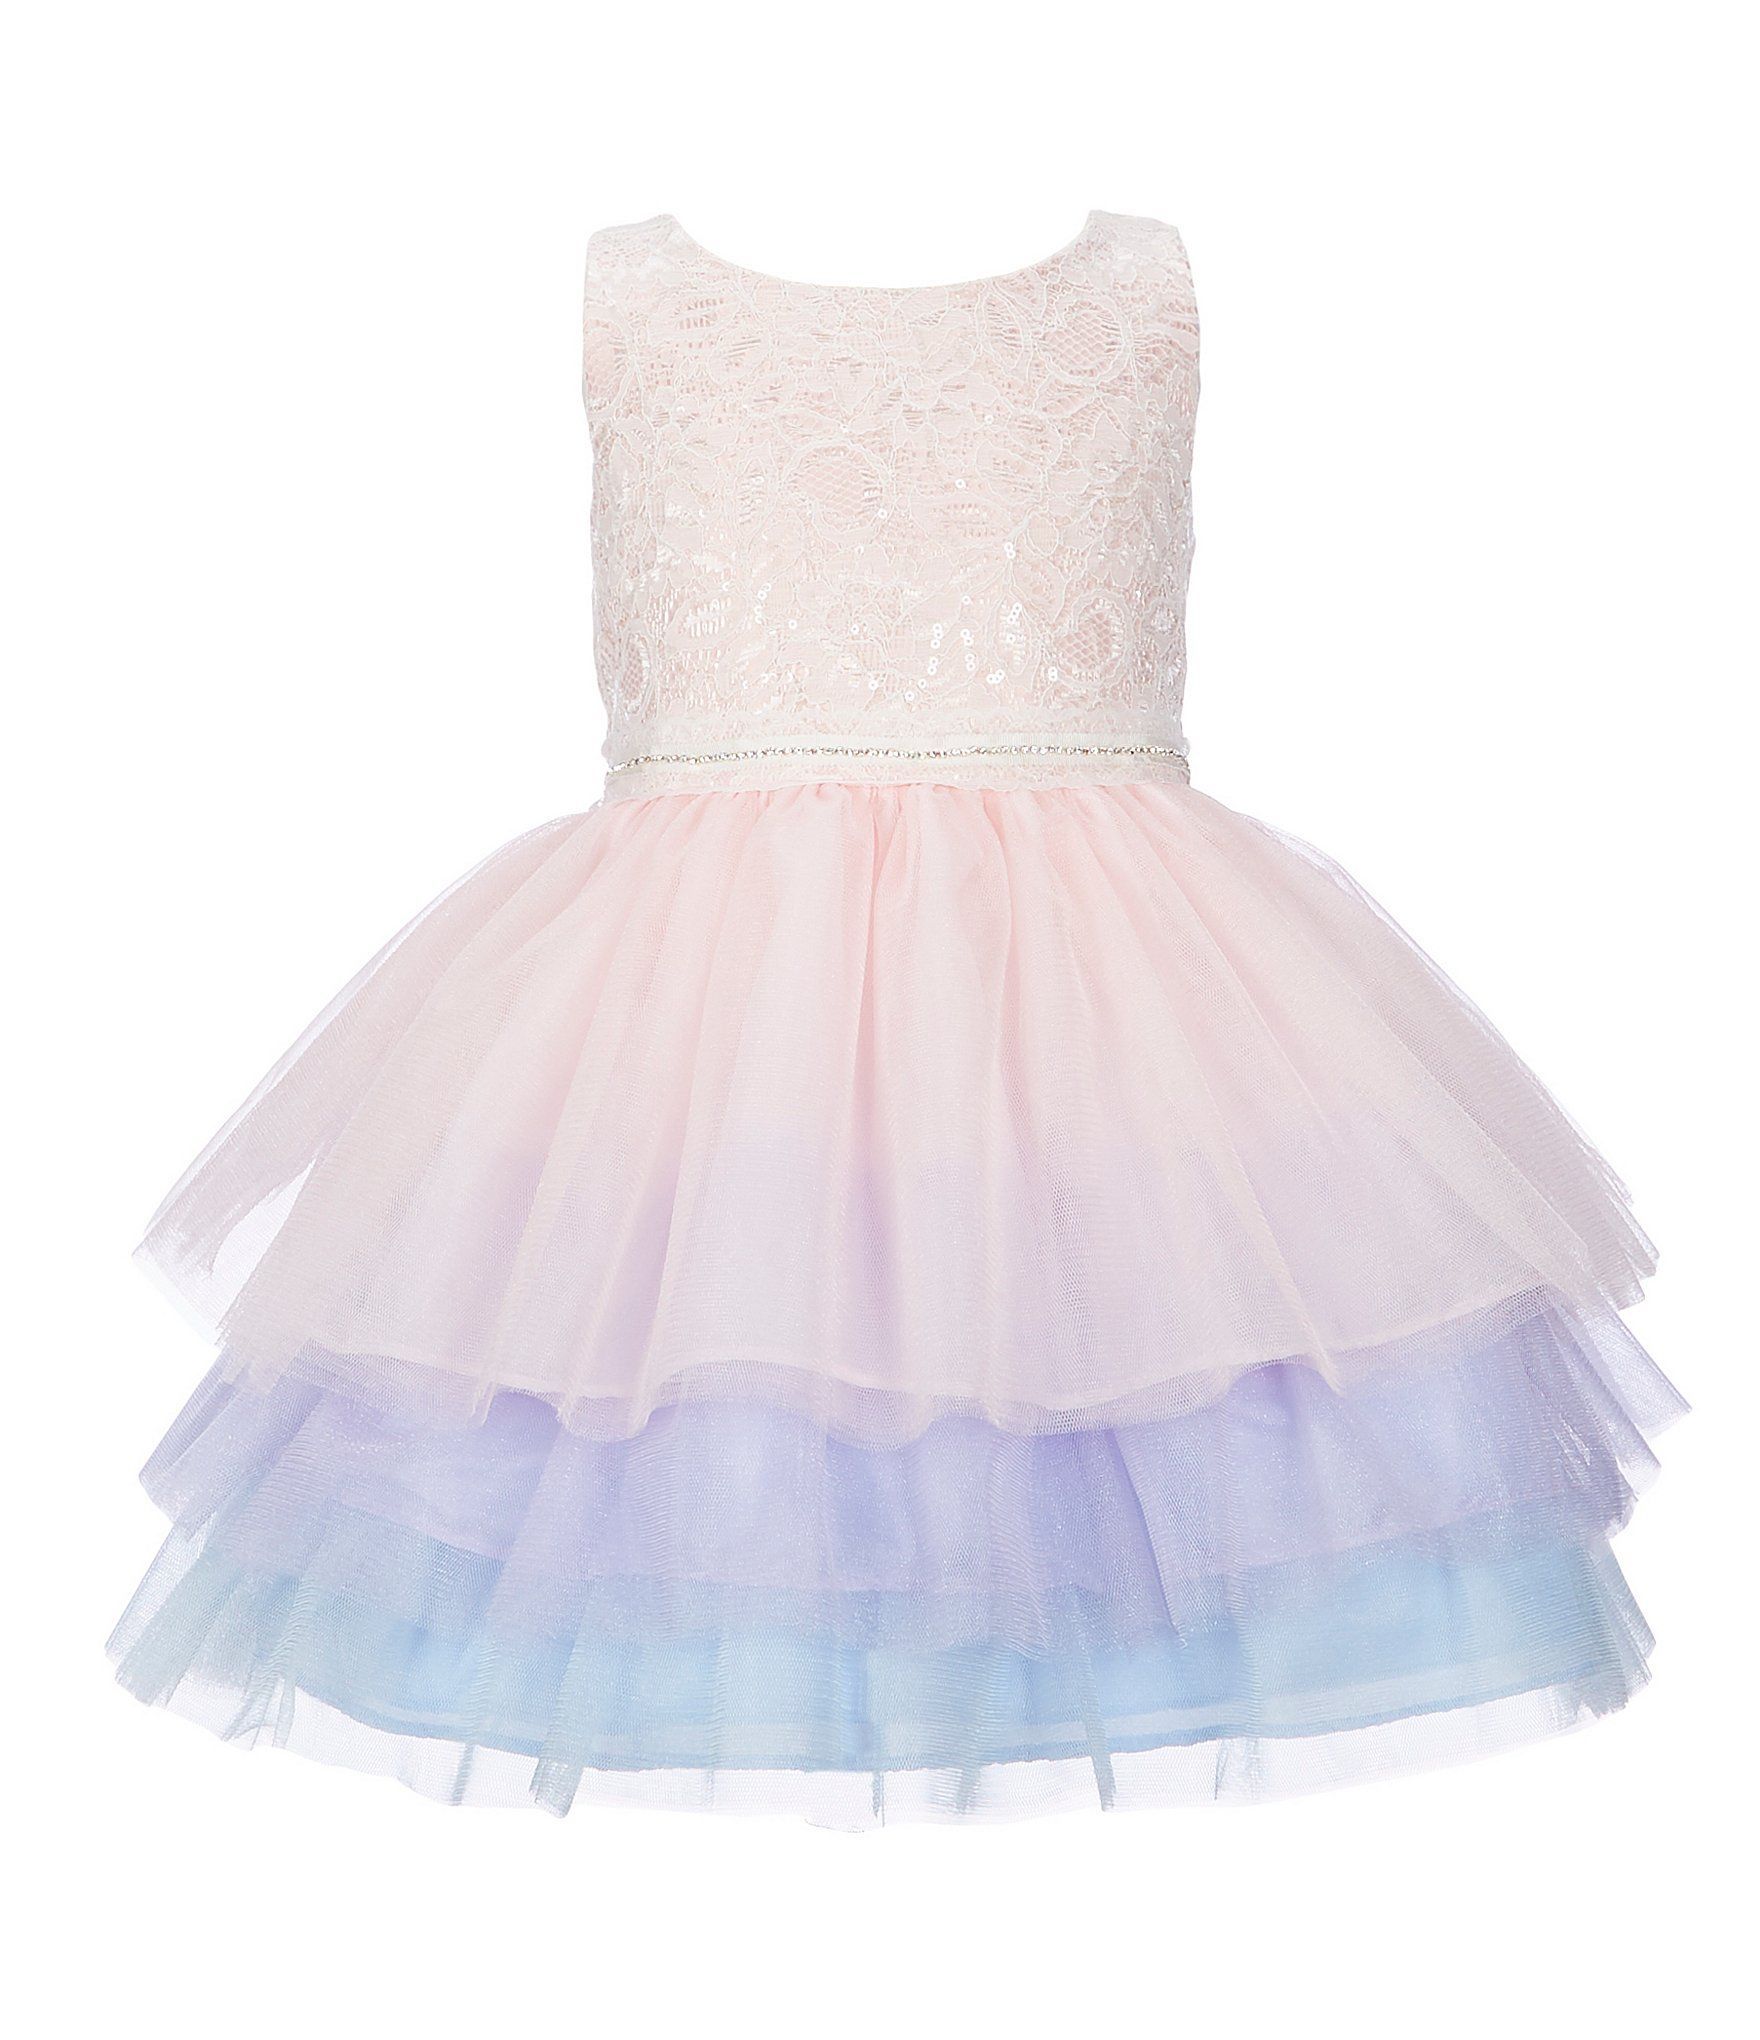 Sweet Kids Little Girls 2-6 Lace Bodice/Tiered Tutu Fit-And-Flare Dress | Dillard's -   18 cocktail dress For Kids ideas